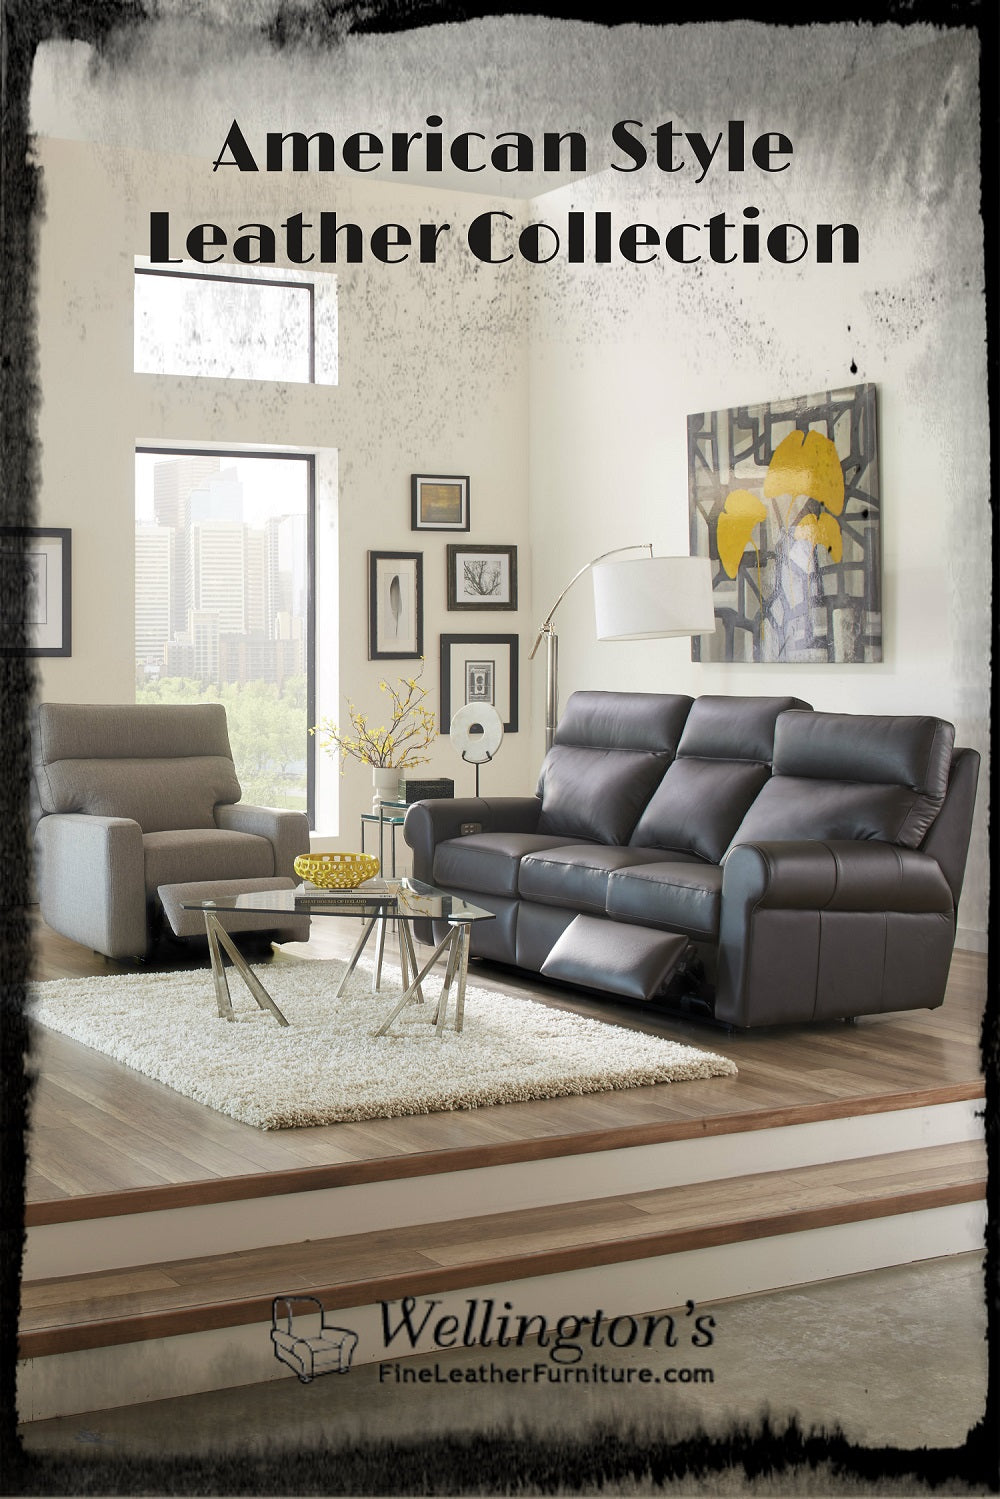 American Style Leather Furniture Collection By Wellington's Fine Leather Furniture